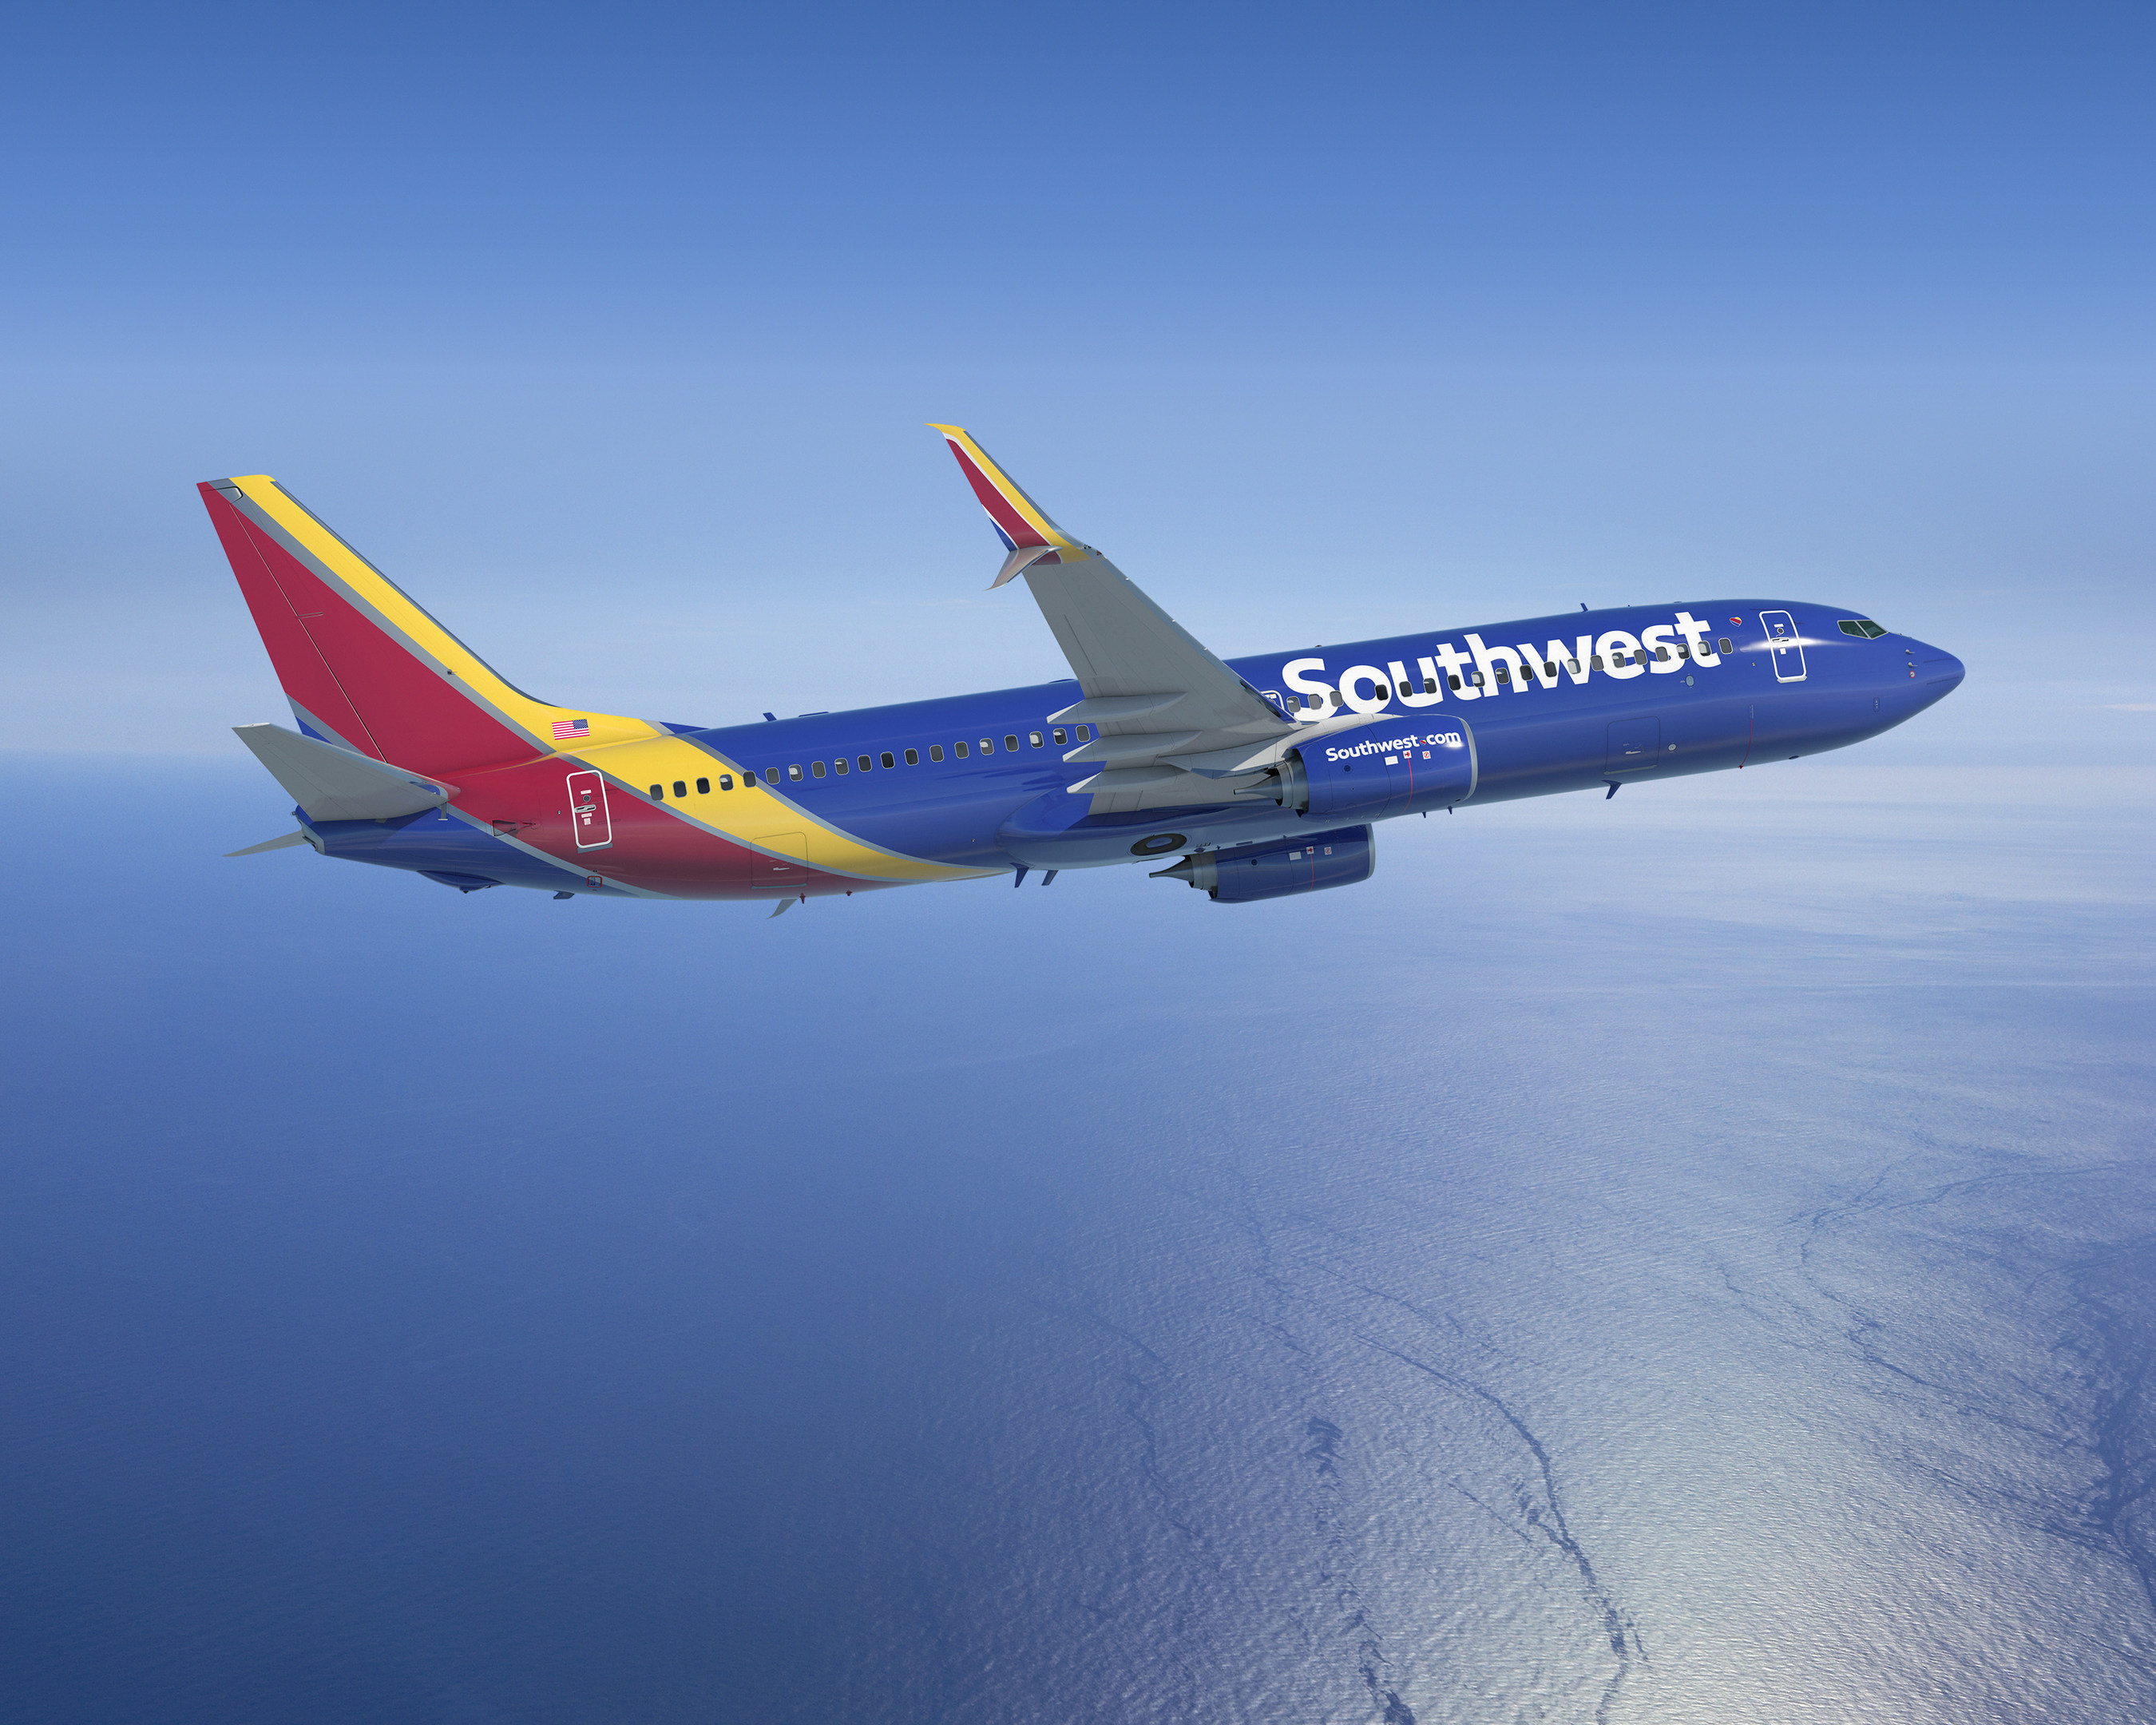 Southwest Airlines NextGen fleet to take to the skies with Honeywell cockpit technologies